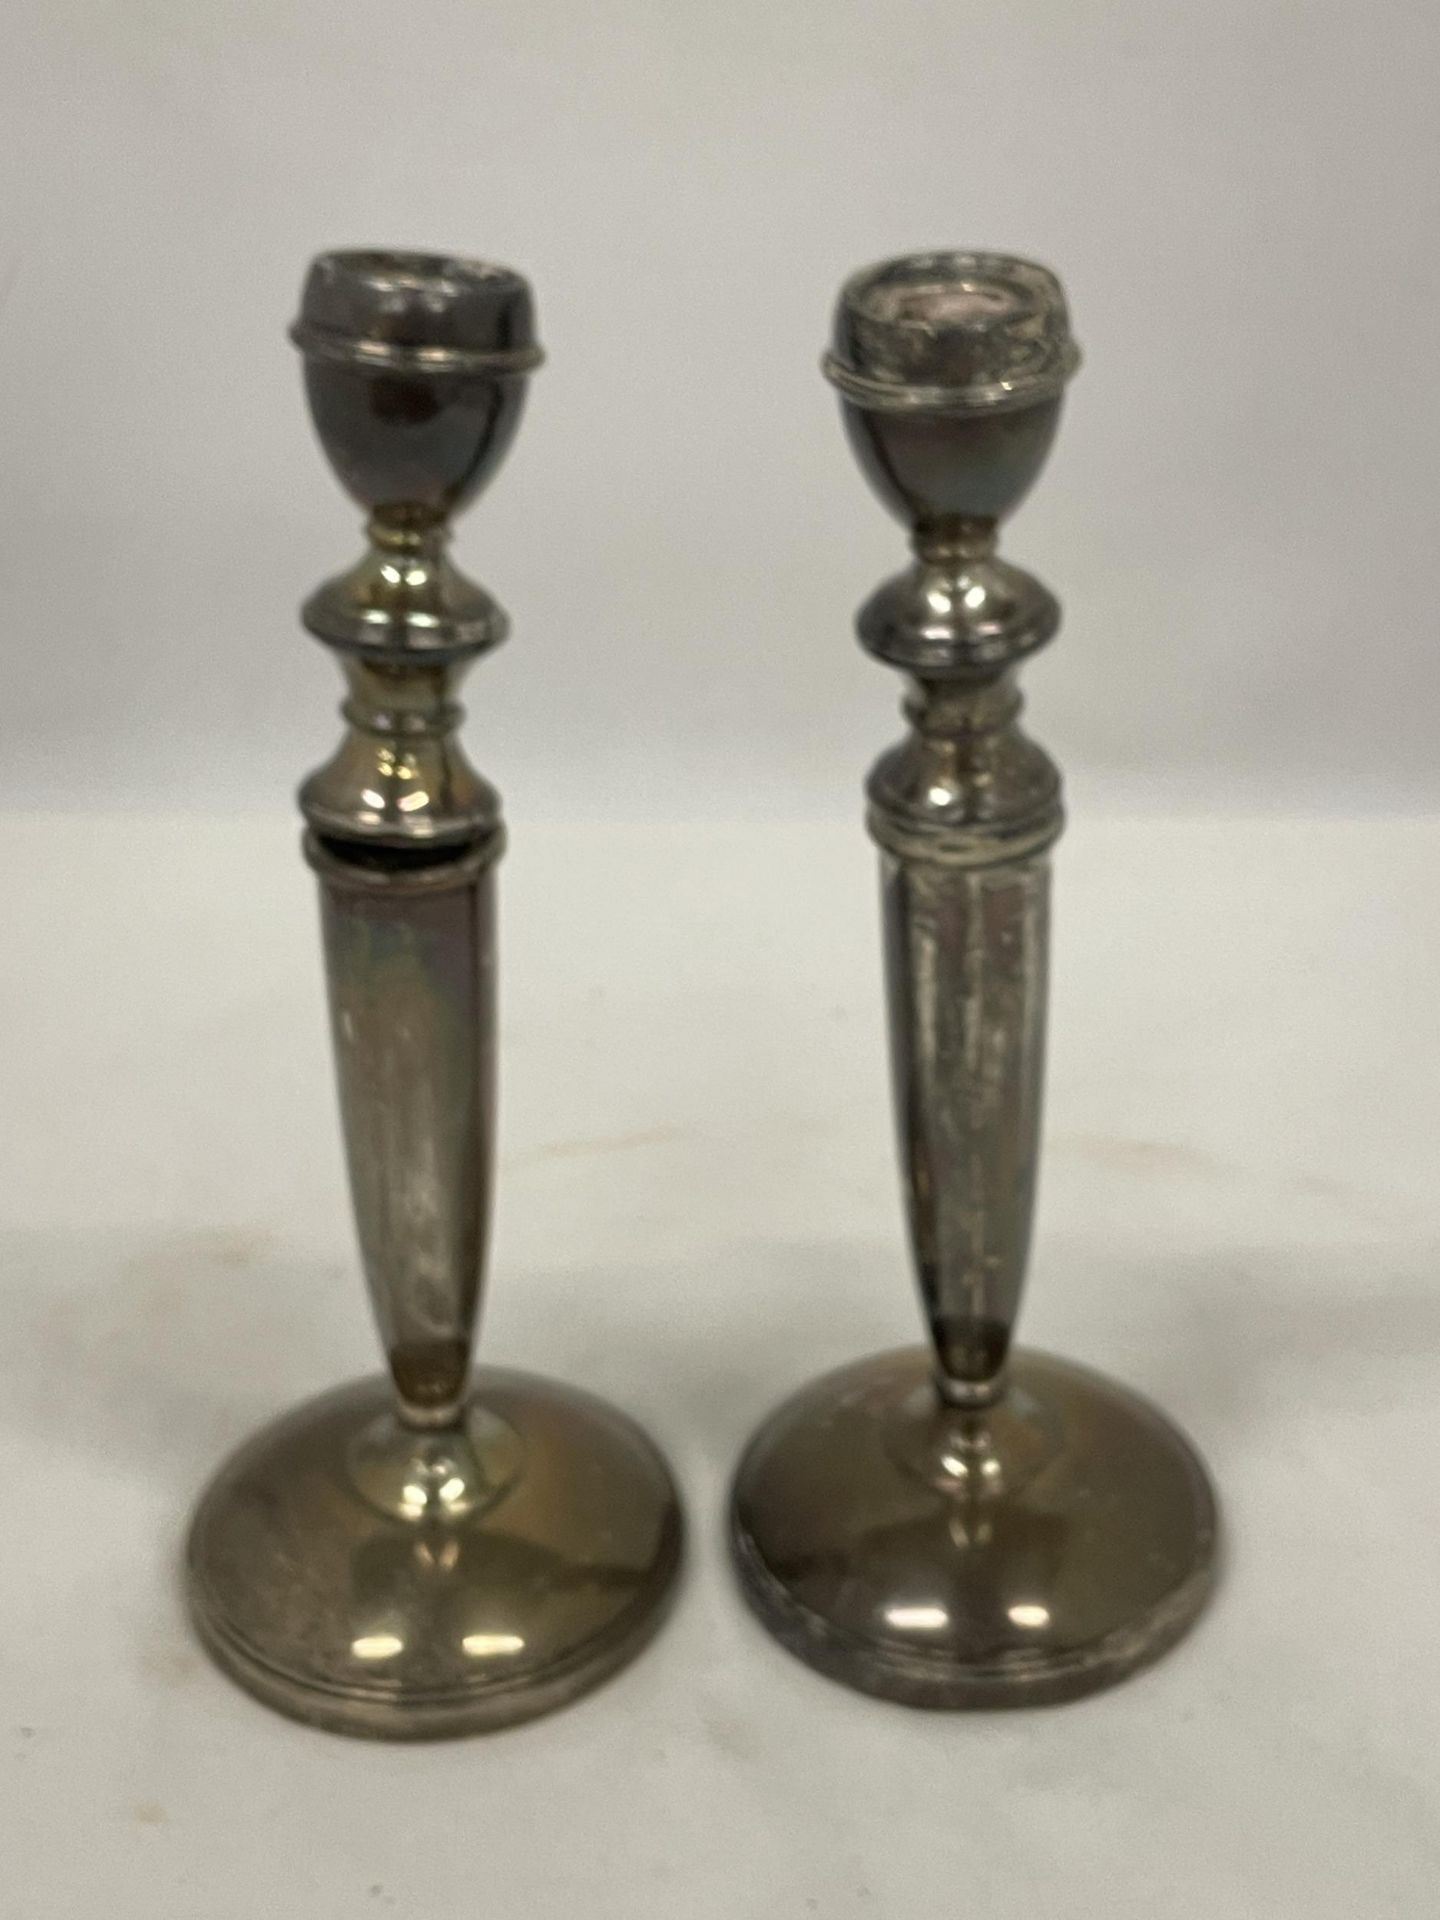 A PAIR OF HALLMARKED BIRMINGHAM SILVER CANDLESTICKS (ONE A/F) WITH WEIGHTED BASES